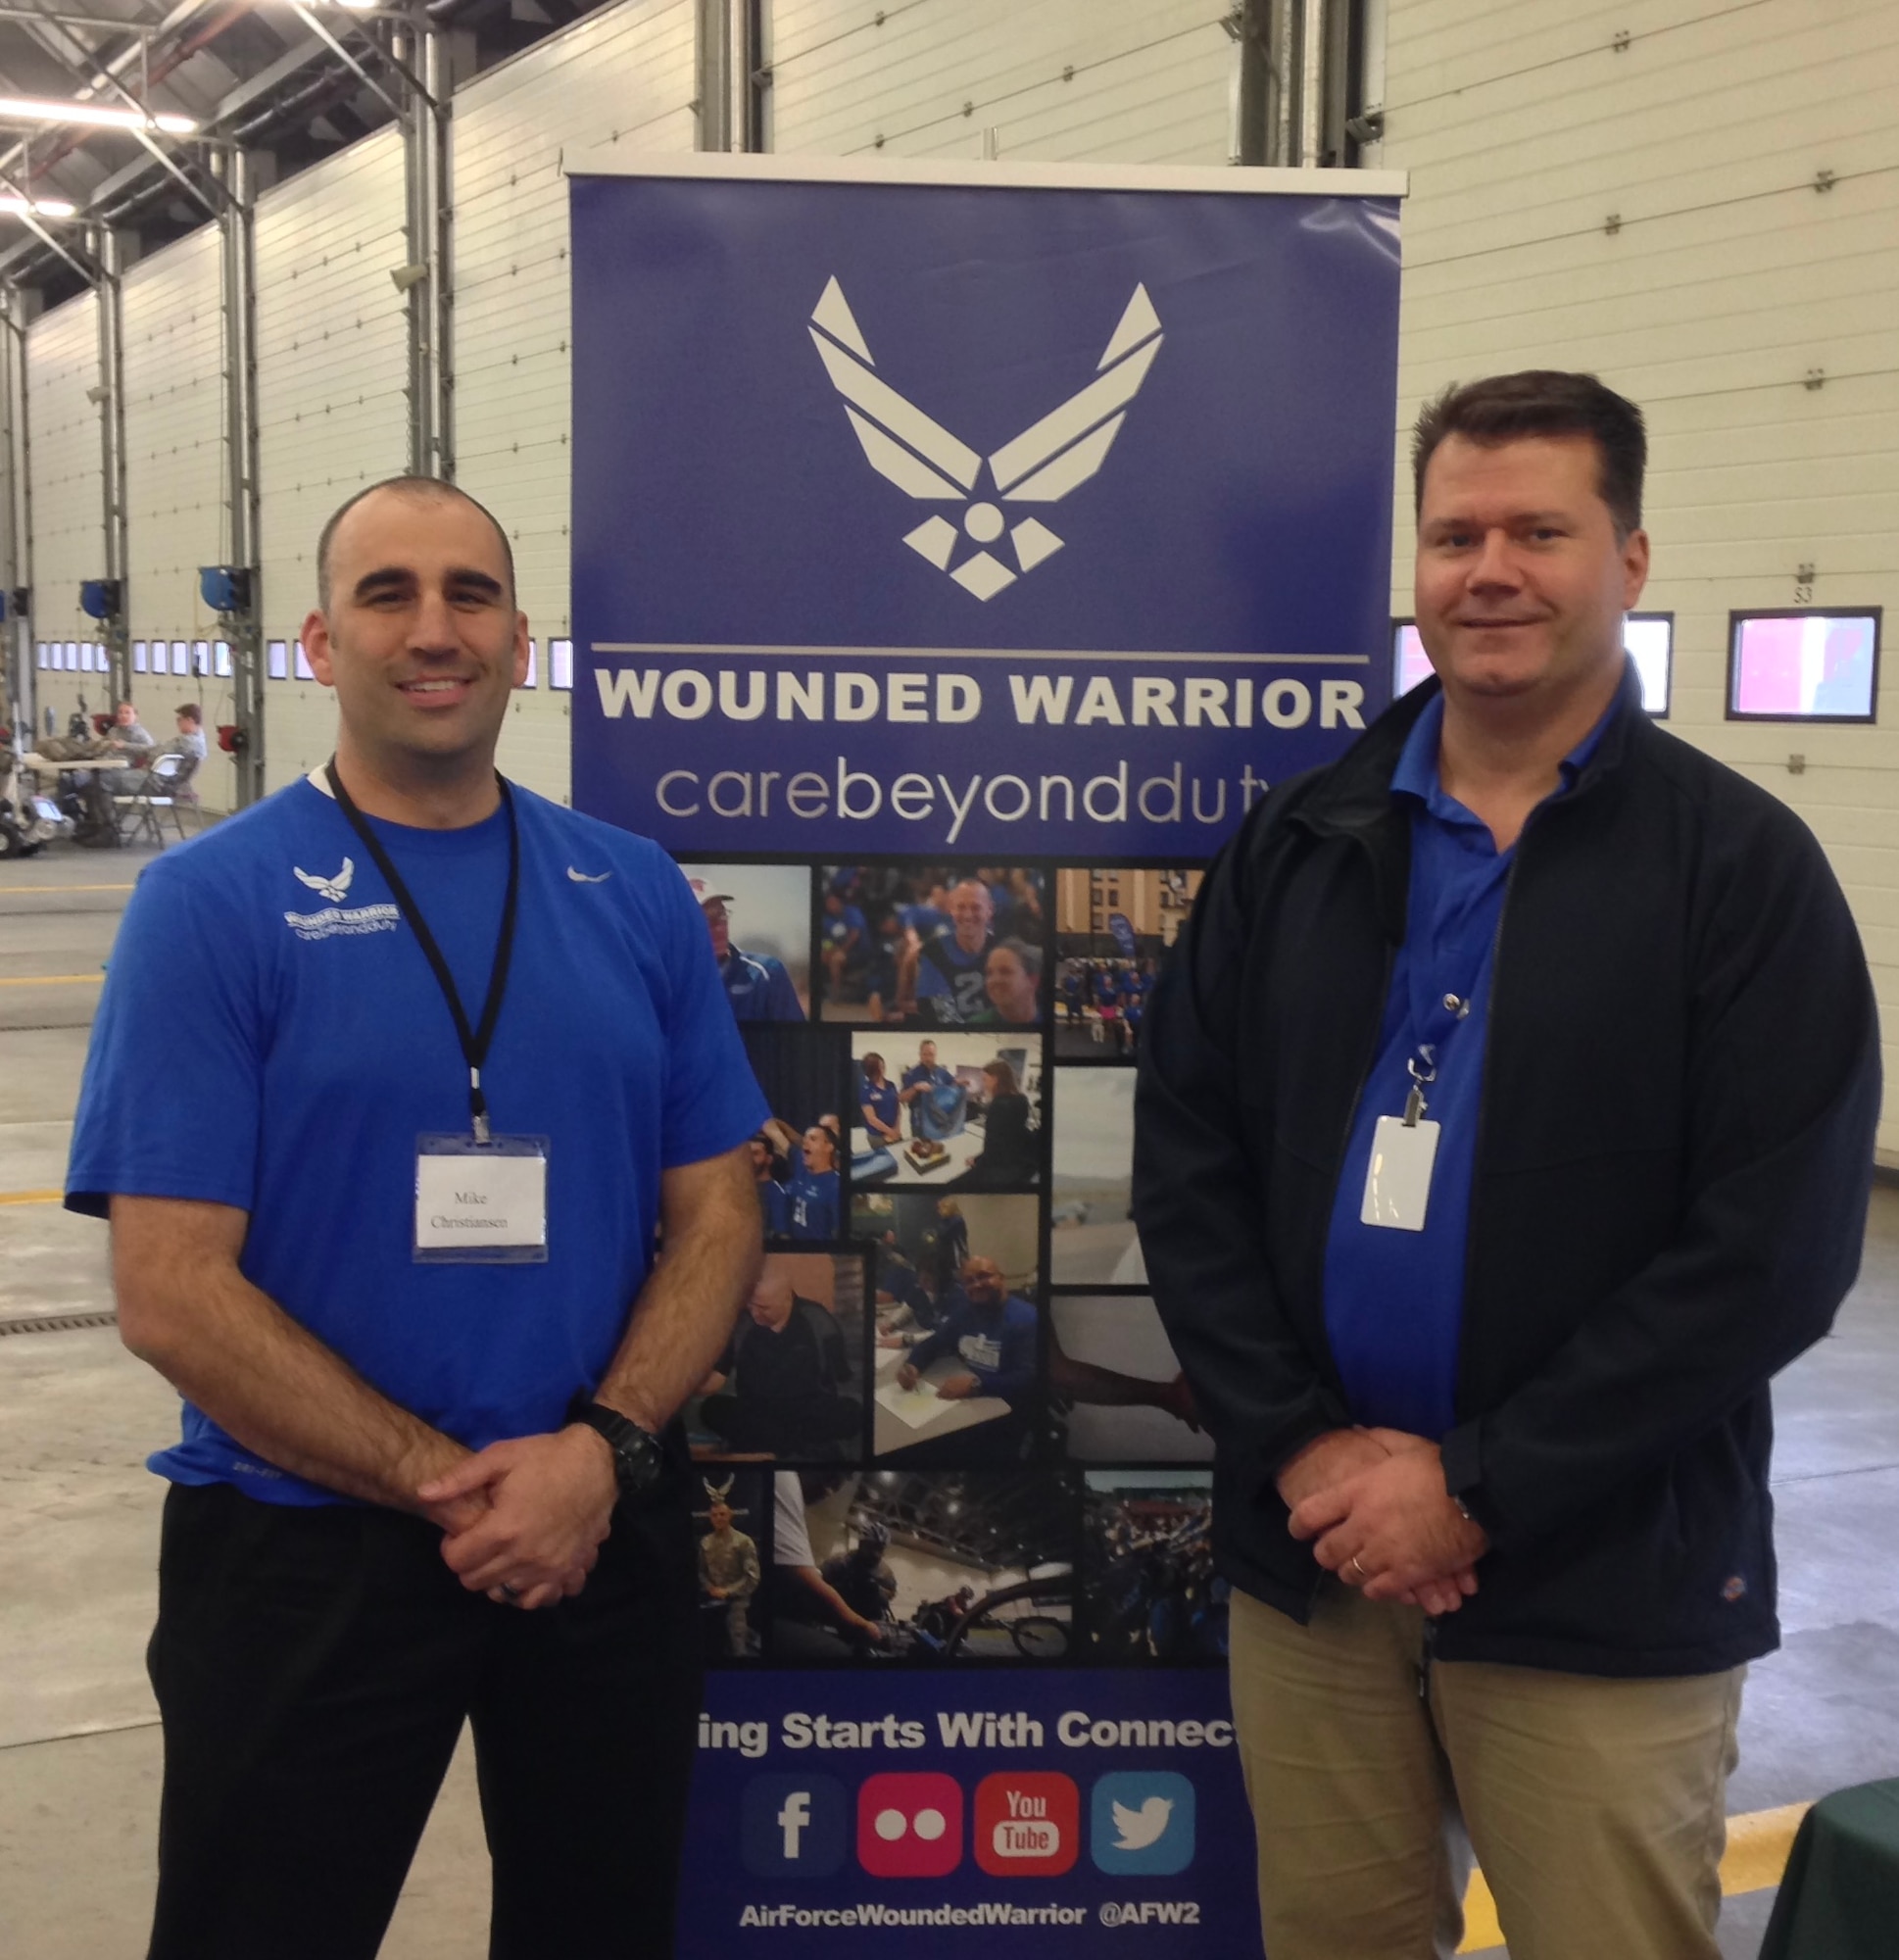 U.S. Air Force Master Sgt. (ret) Mike Christensen, left, and Senior Master Sgt. (ret.) Beau Jones, recovery care coordinator, represent the Air Force Wounded Warrior Program  as part of and event with a local amputee charity at Royal Air Force Mildenhall in 2016. Christensen has been an Air Force Wounded Warrior since 2011. The two retired senior NCOs shared information about the AFW2 program and how it can help wounded warriors. The purpose of AFW2 is to assist Airmen with either a full return to duty,  or transition into civilian/veteran life for those unable to return to active-duty service.  The program advocates for Airmen to minimise gaps in medical care and provides a broader support network and resiliency tools for both personal and professional growth. (Courtesy photo)